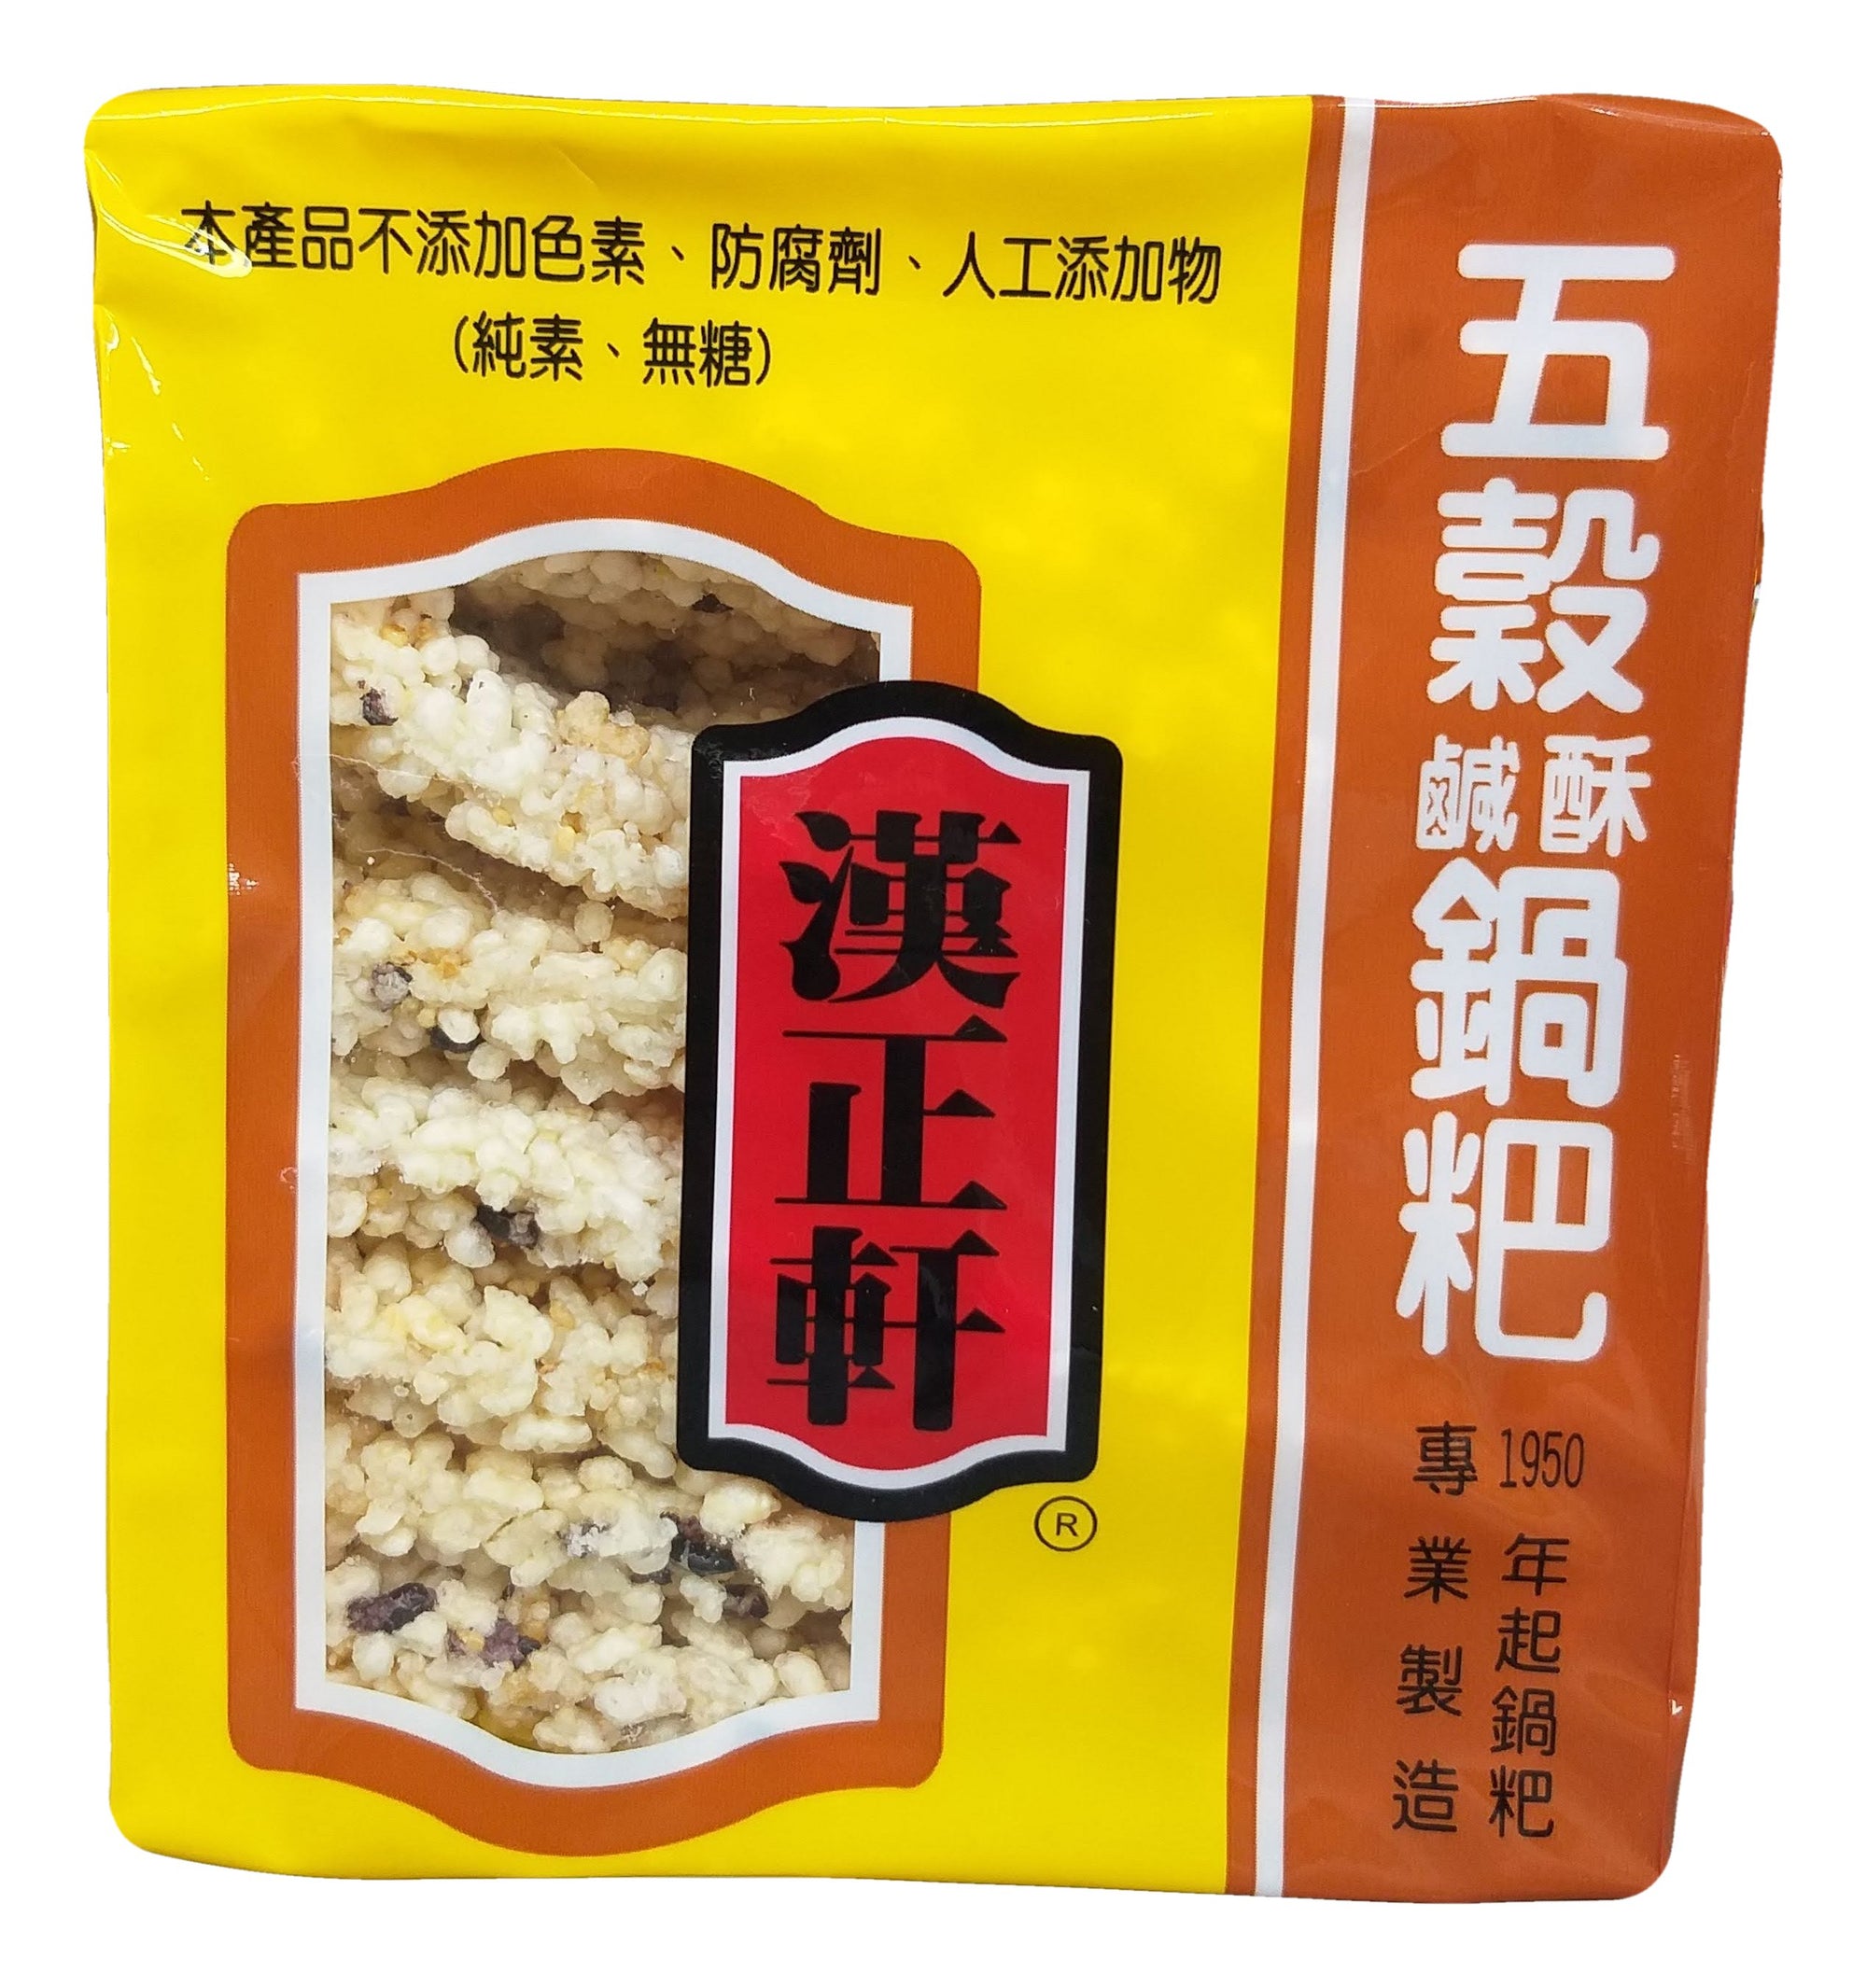 Hahn Shyuan - Rice Cake, 7 Ounces, (1 pack of 5)